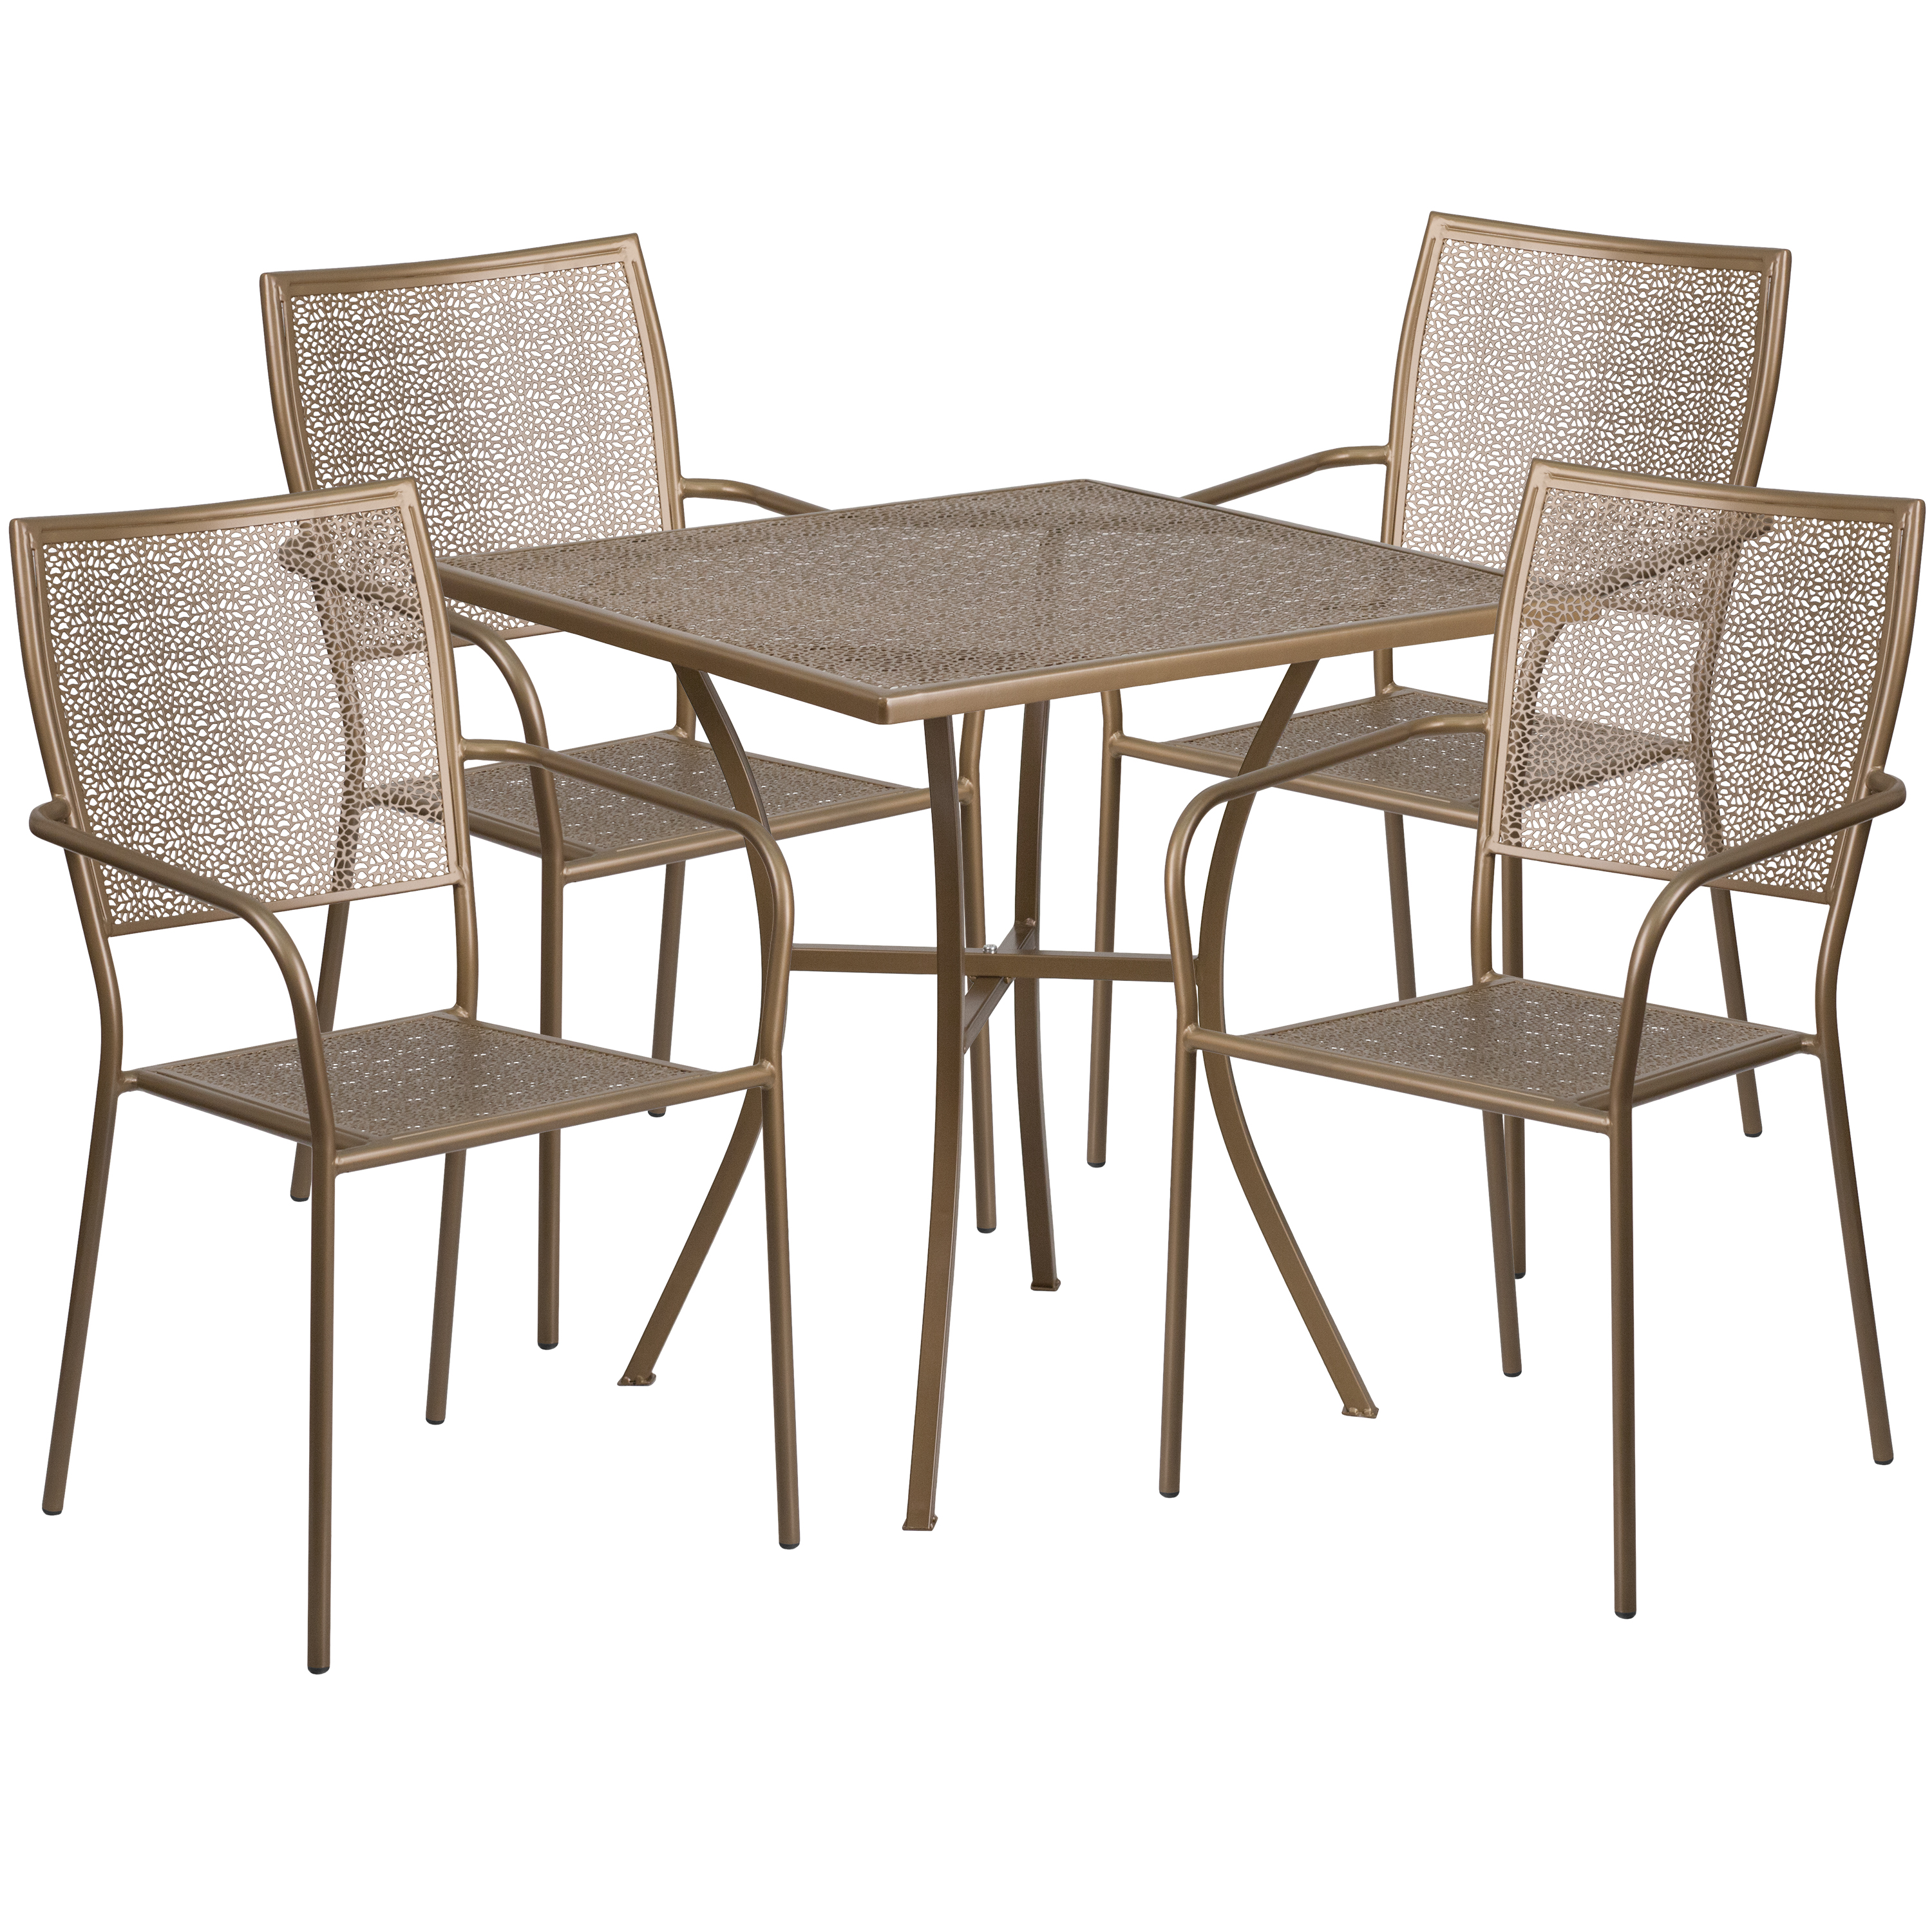 Flash Furniture CO-28SQ-02CHR4-GD-GG 28" Square Gold Indoor/Outdoor Steel Patio Table Set with 4 Square Back Chairs